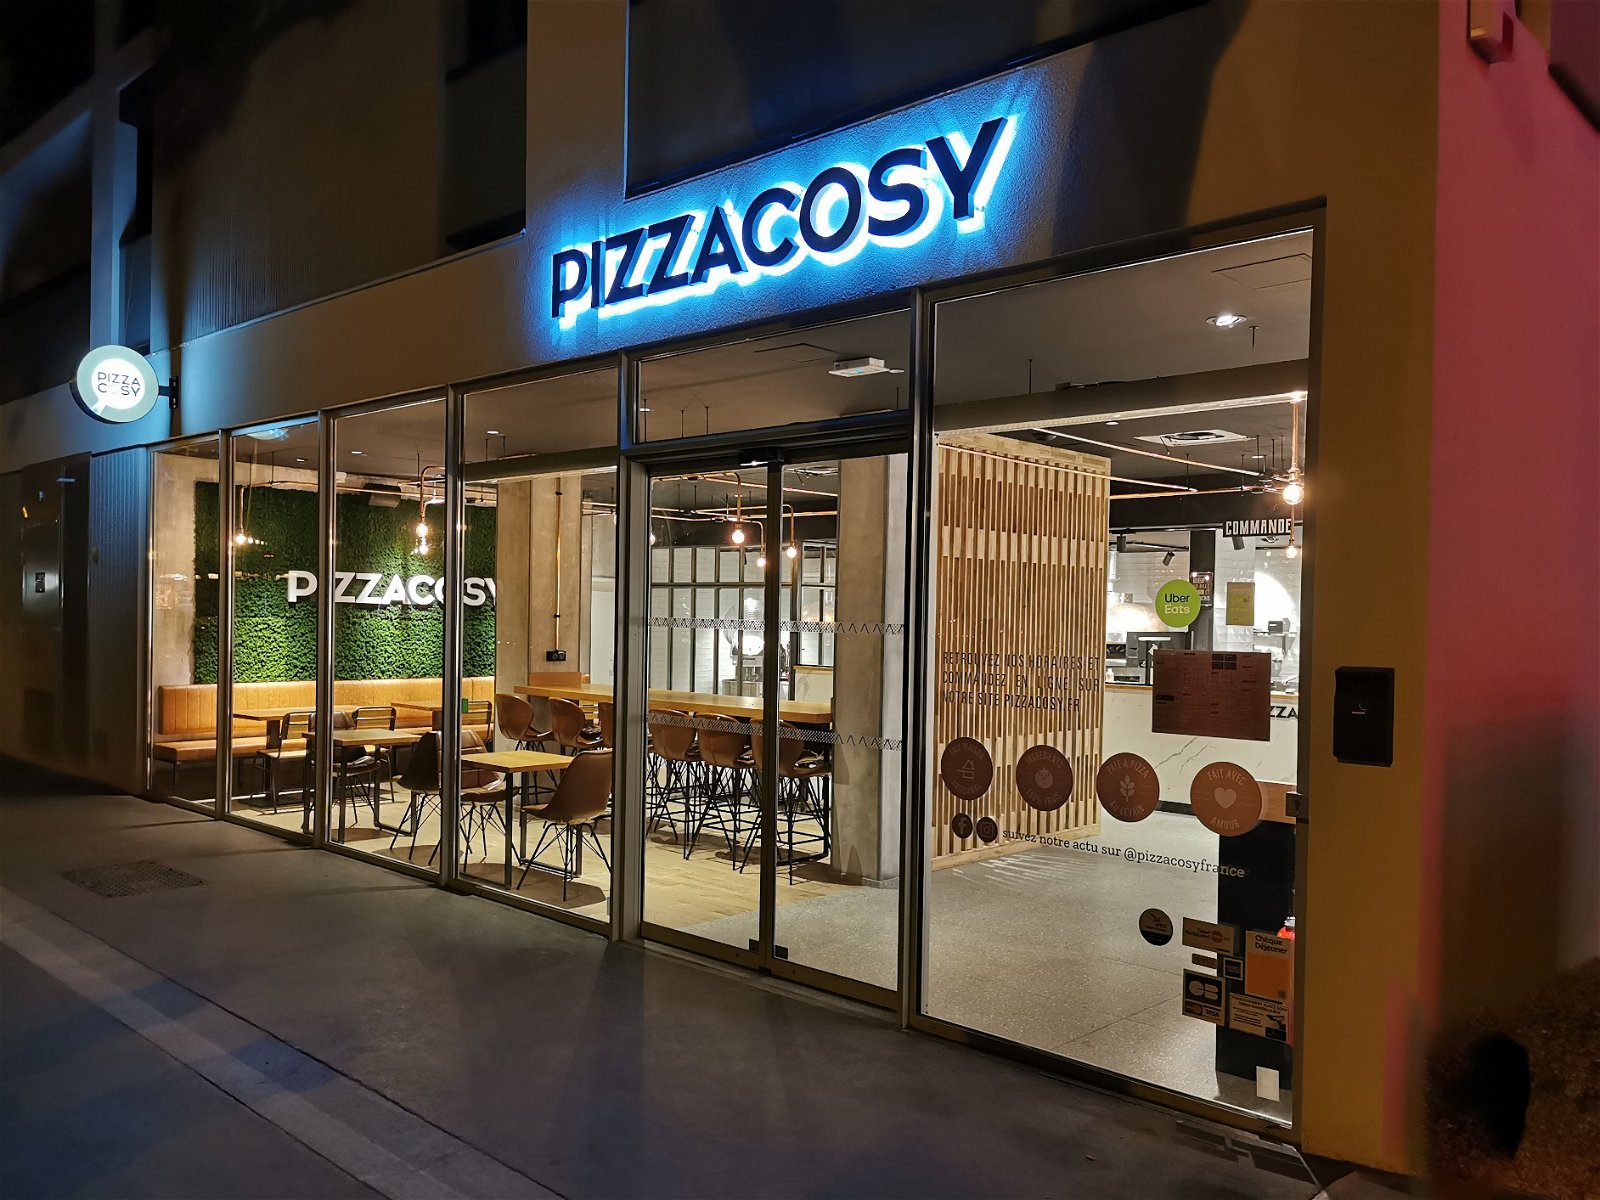 Franchise Pizza Cosy